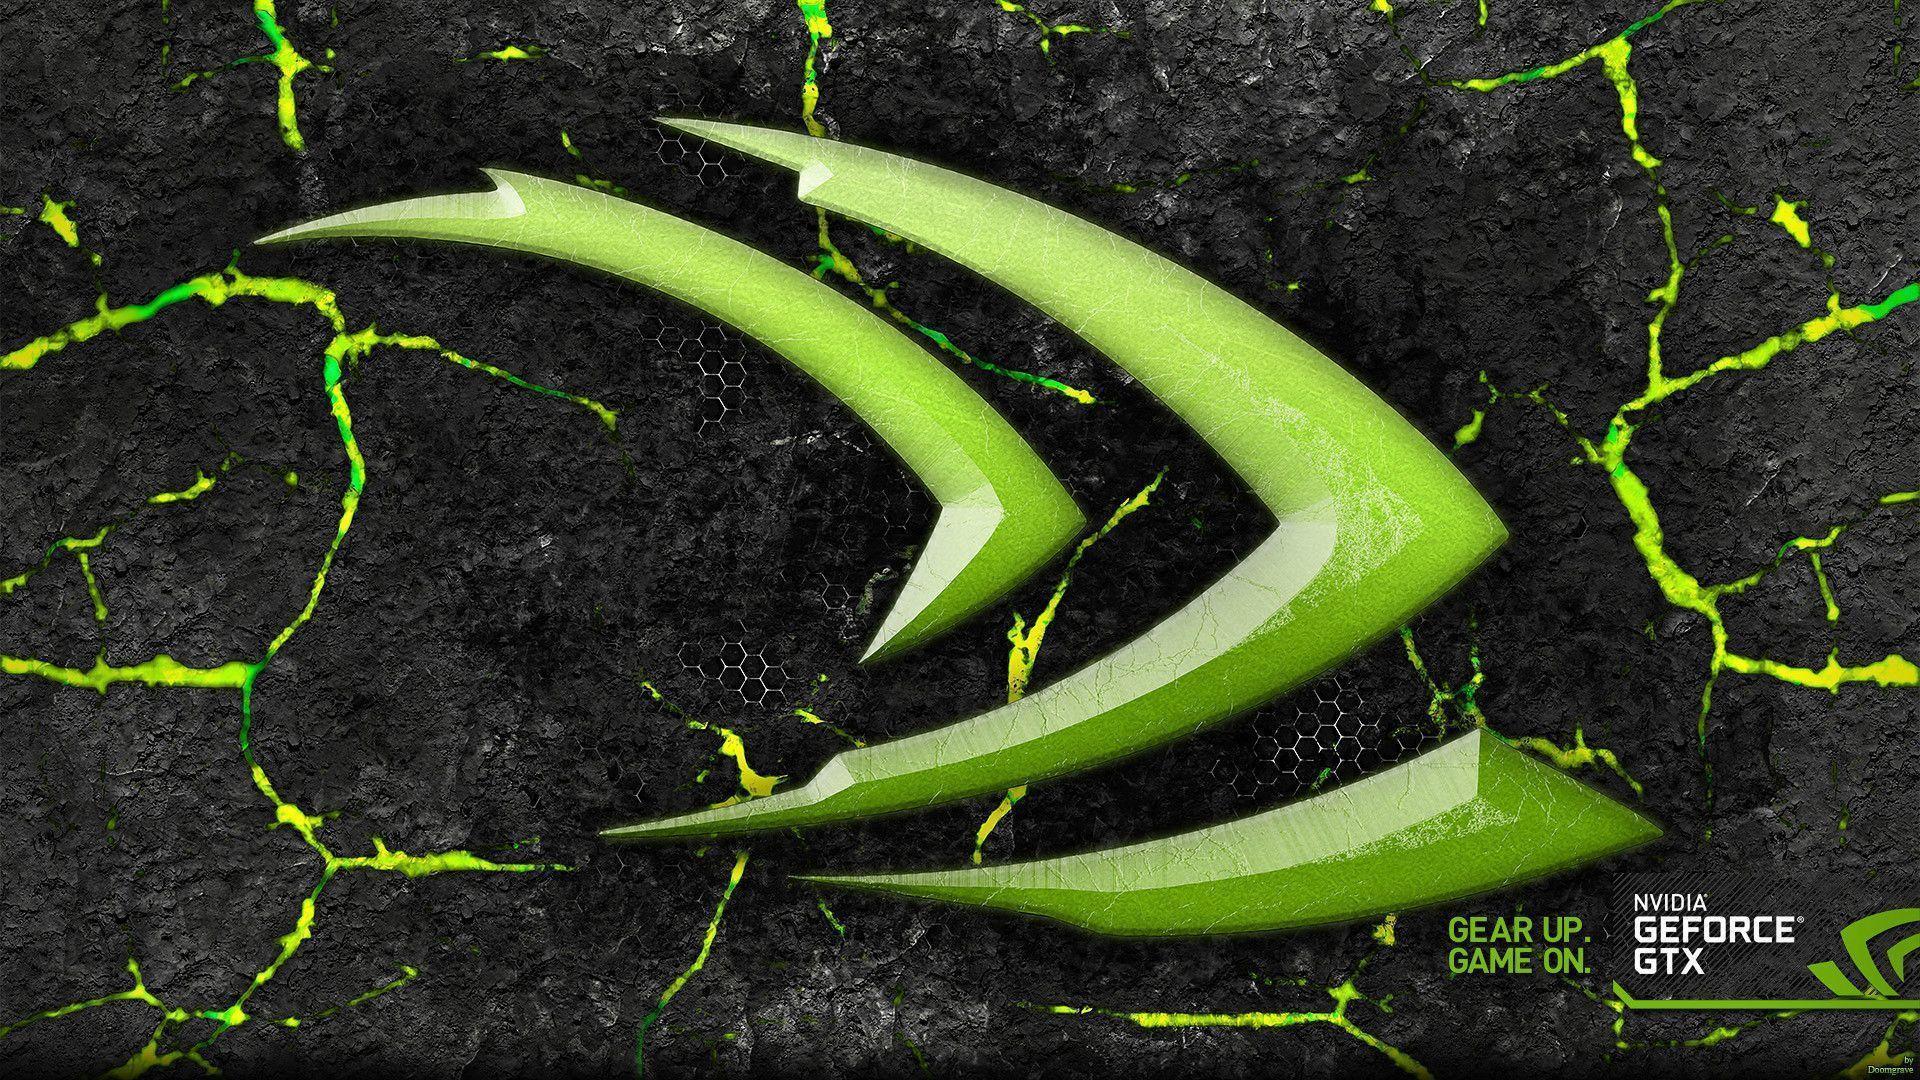 Nvidia Overpowered, Desktop and mobile wallpaper